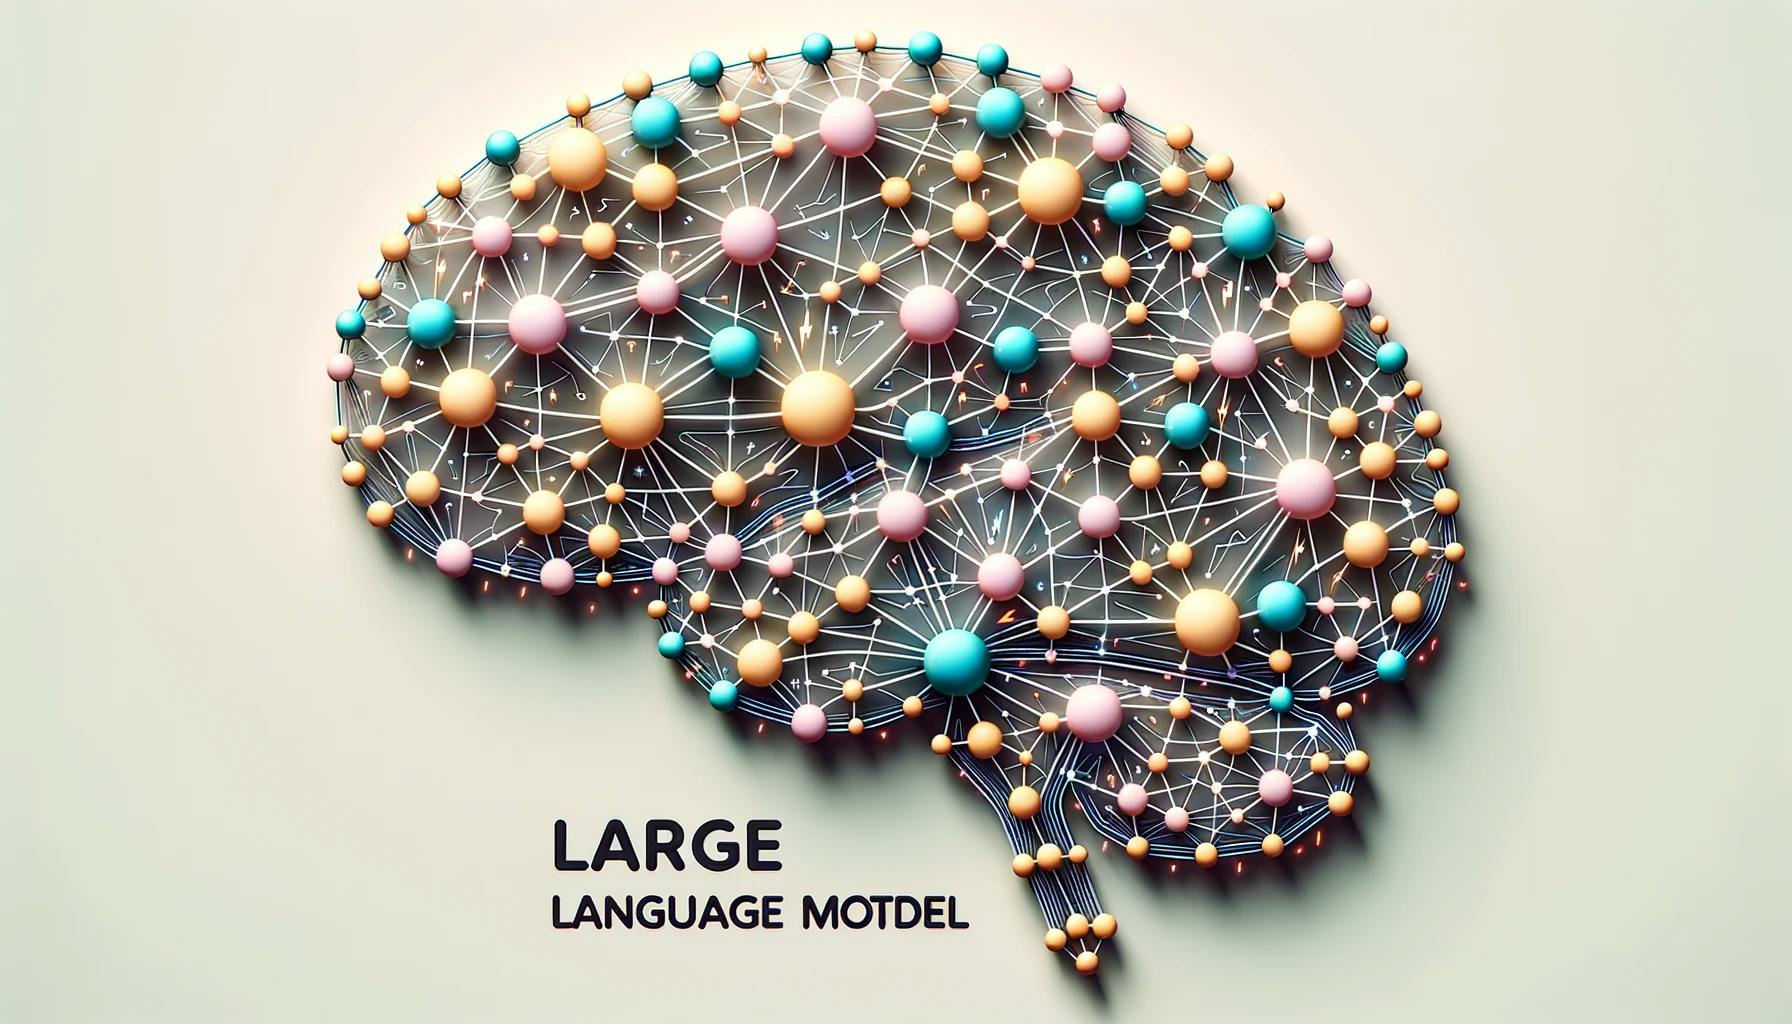 Dive into the fascinating world of Uncensored Large Language Models (LLM). From their versatility to technical prowess, this comprehensive guide covers it all. Get ready to explore the future of AI!